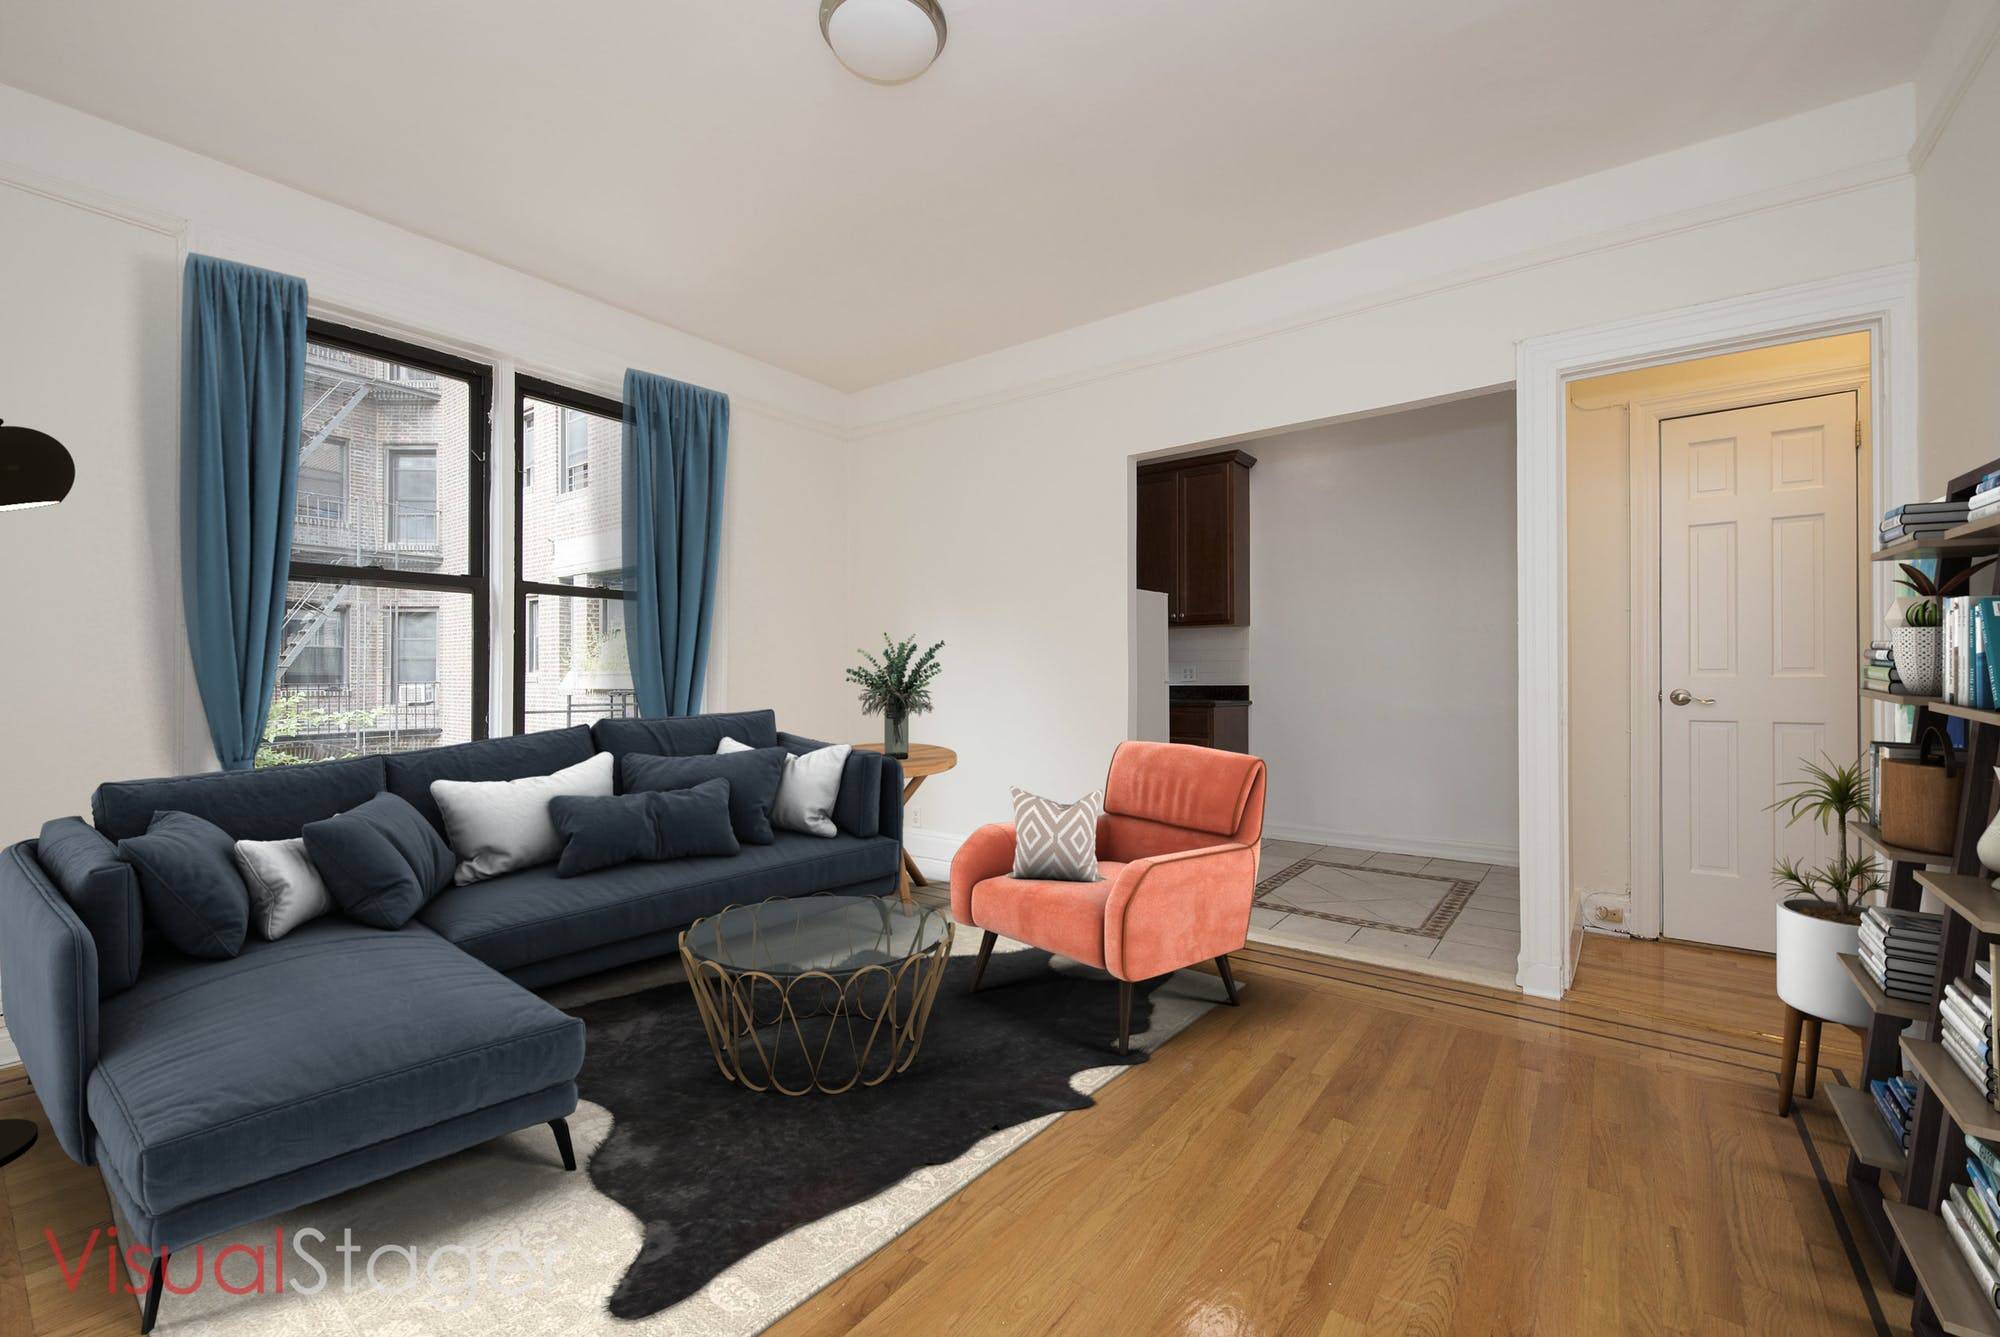 NO BROKERS FEE ! Apartment Features Rent Stabilized apartment 807 Square Feet Brand new stainless steel appliances not pictured Separate, windowed, kitchen Excellent closet storage space Windowed bathroom King size ...